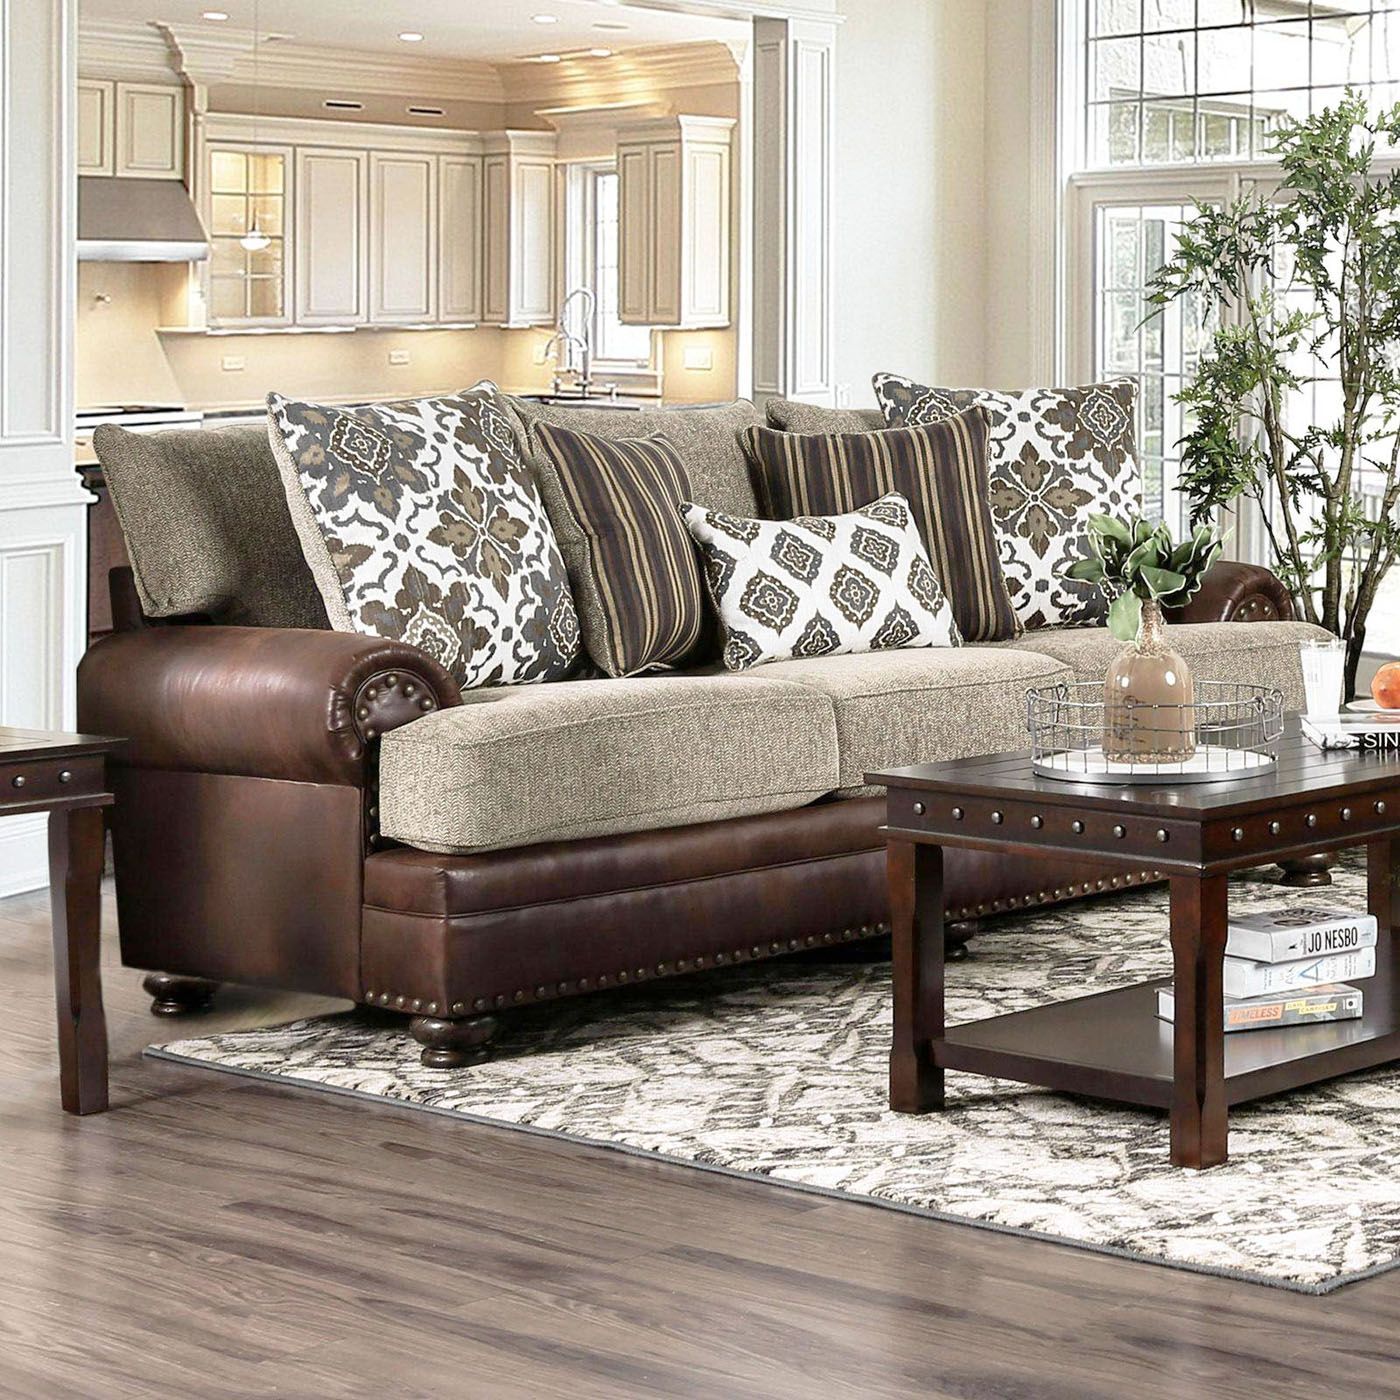 Transitional Two Tone Beige & Brown Sofa Set W/ Rolled Arms & Nailhead Trim Throughout Ecru And Otter Console Tables (Gallery 20 of 20)